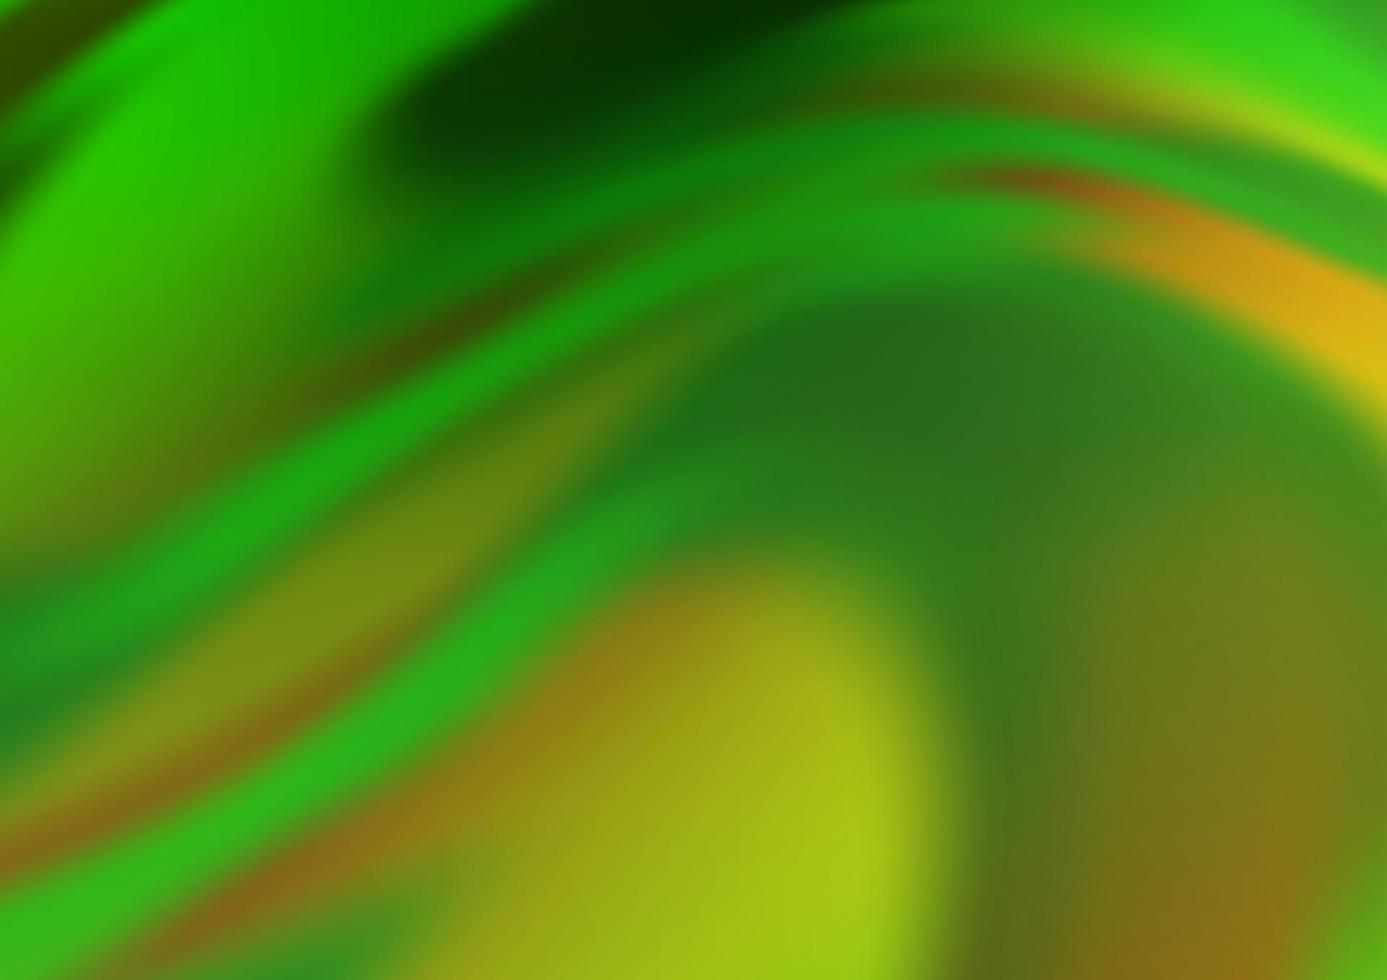 Light Green vector background with curved circles.